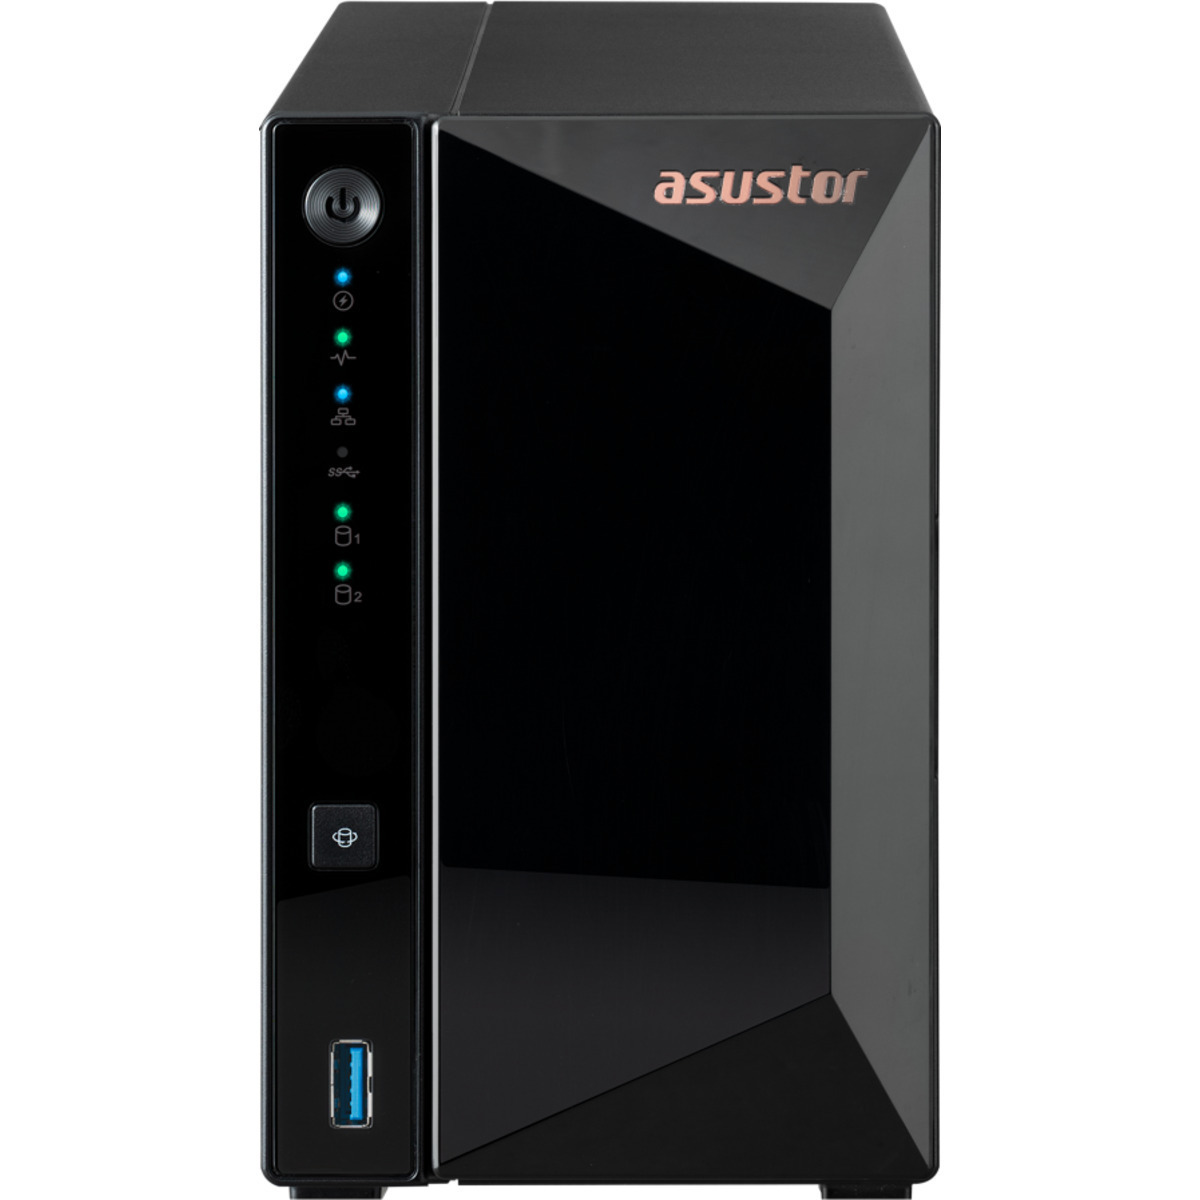 ASUSTOR DRIVESTOR 2 Pro AS3302T 24tb 2-Bay Desktop Personal / Basic Home / Small Office NAS - Network Attached Storage Device 2x12tb Seagate IronWolf Pro ST12000NT001 3.5 7200rpm SATA 6Gb/s HDD NAS Class Drives Installed - Burn-In Tested - ON SALE DRIVESTOR 2 Pro AS3302T